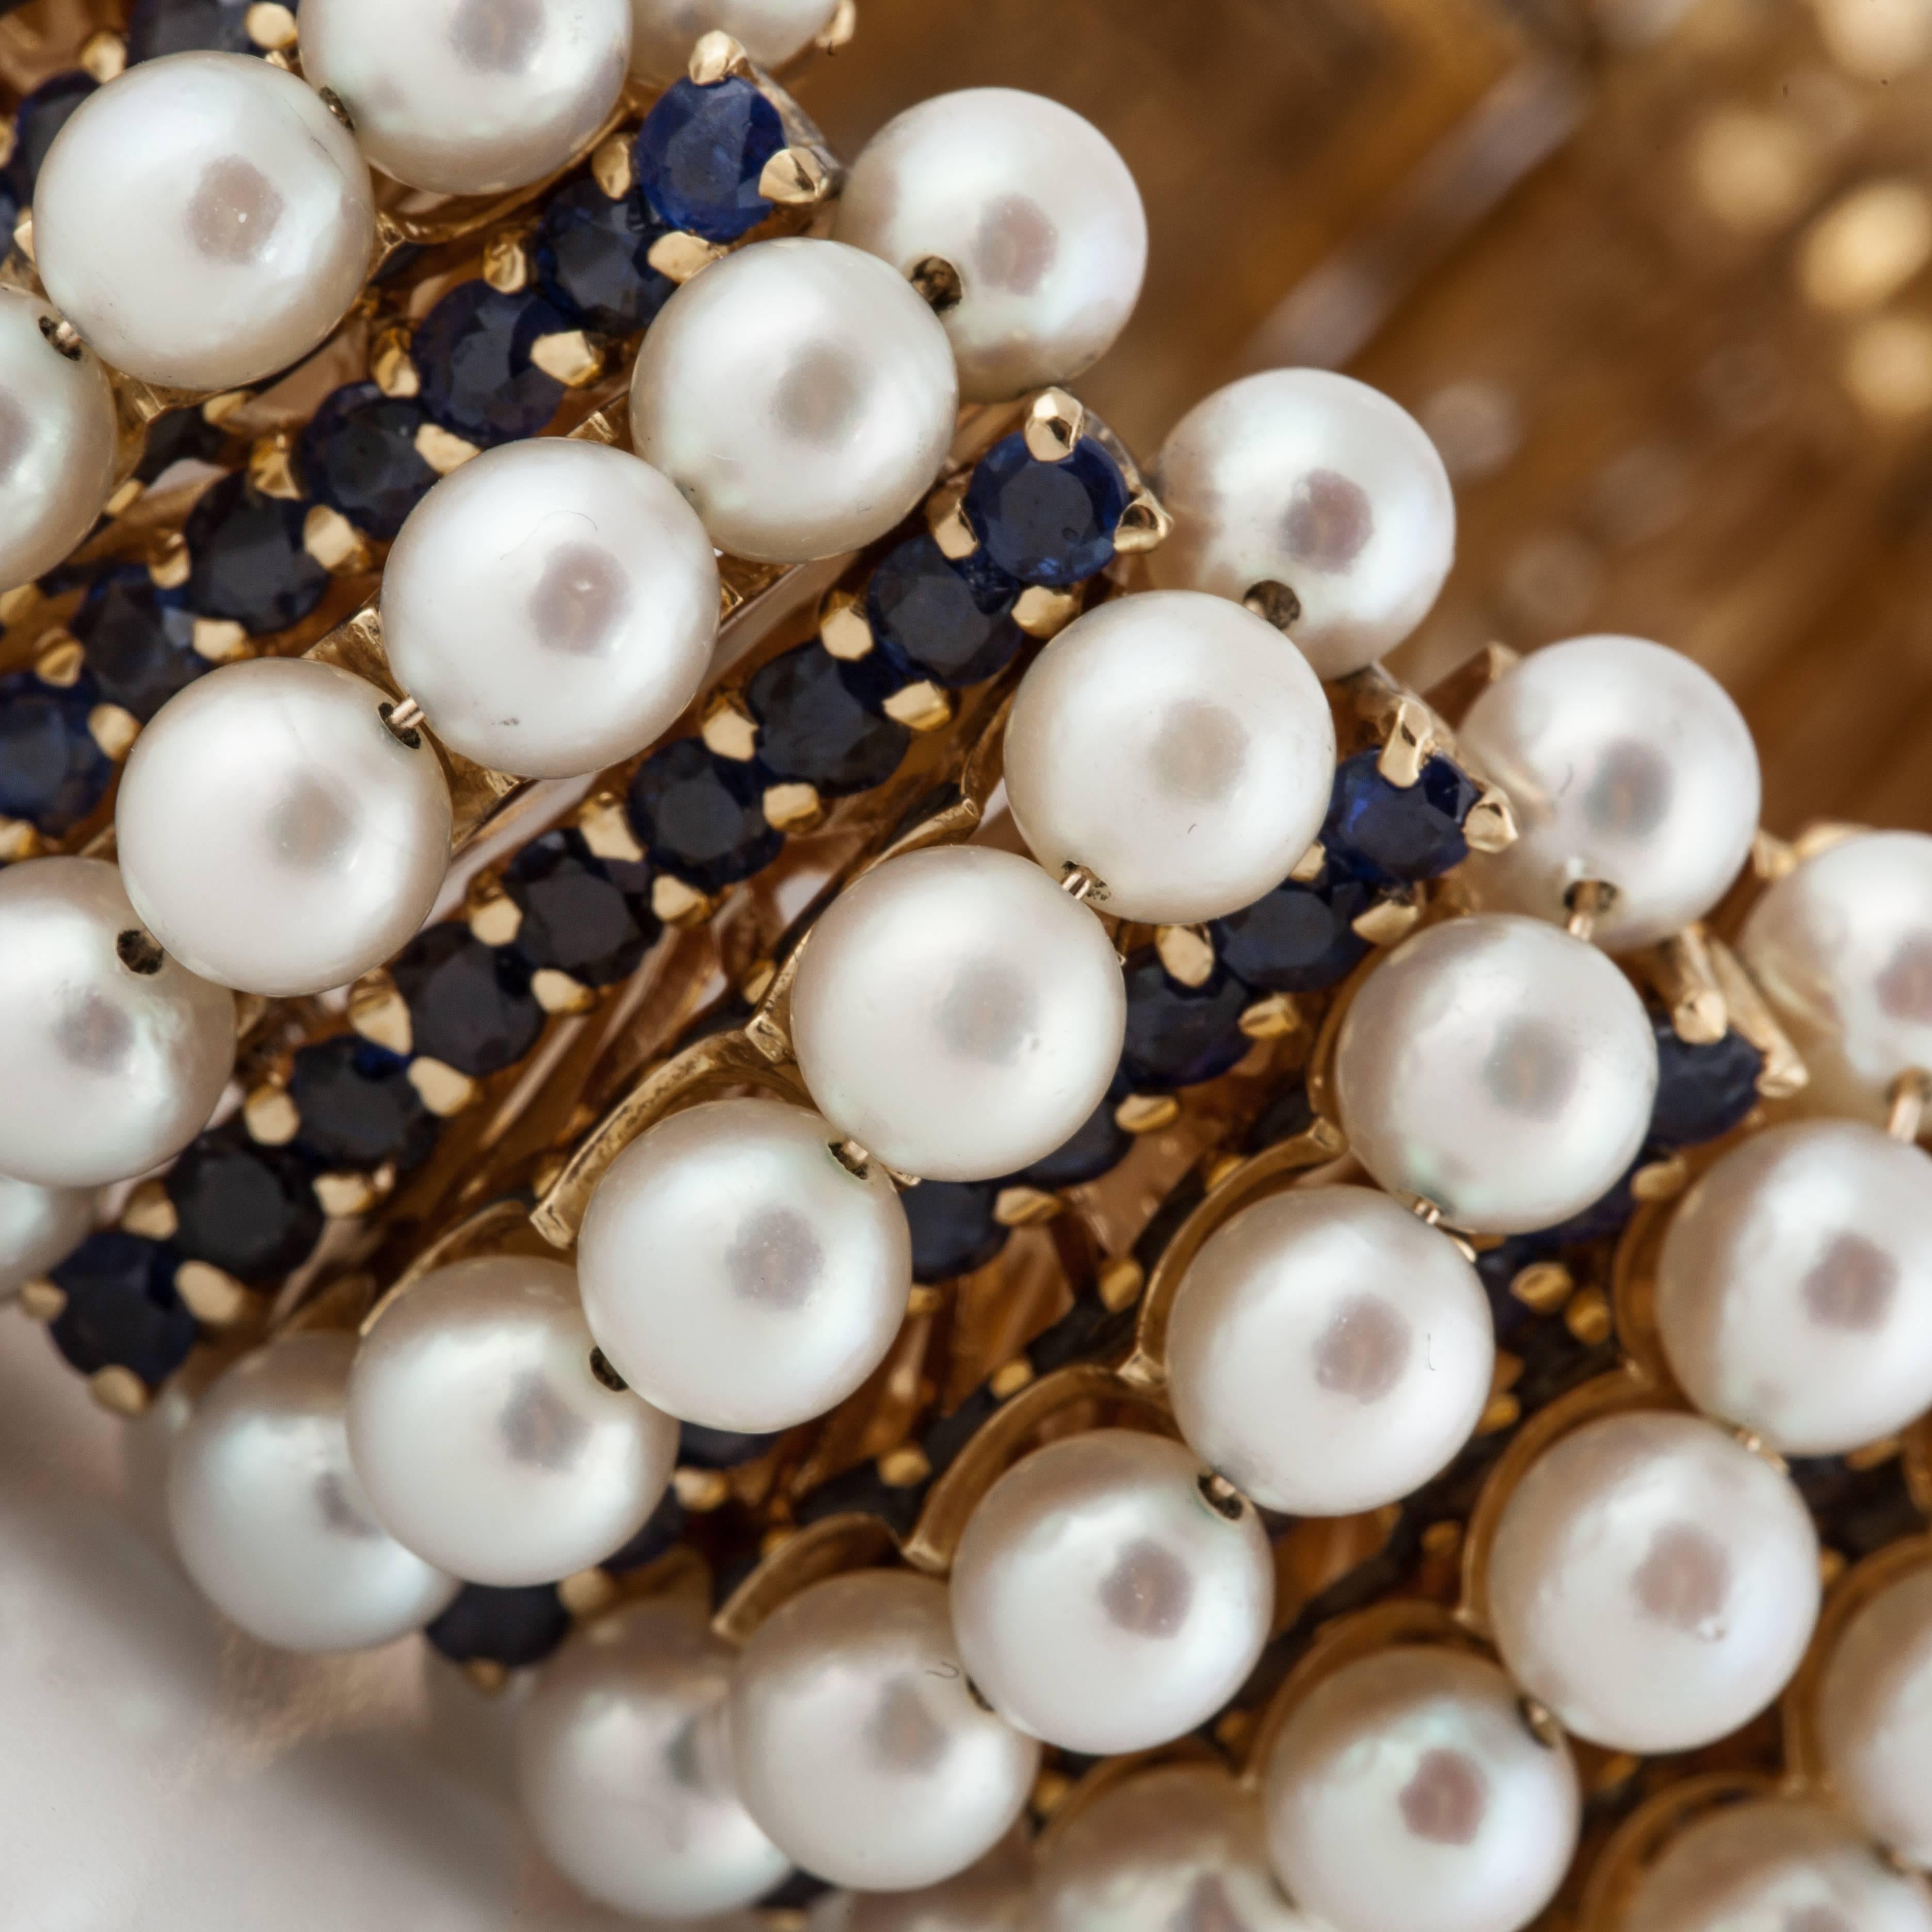 pearl and sapphire bracelet